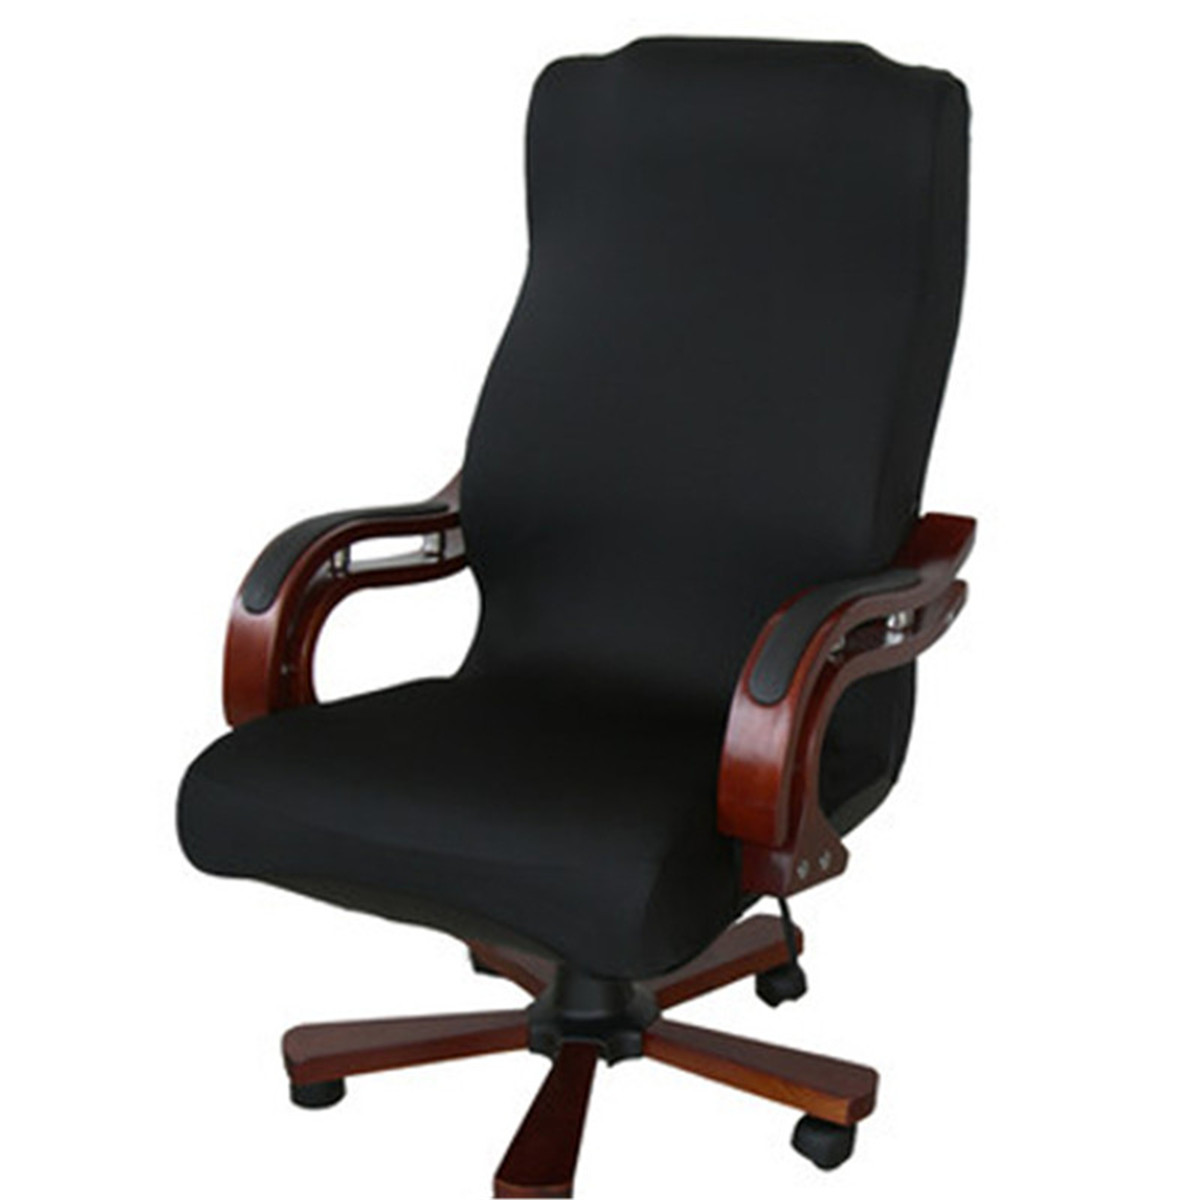 KUDOSALE chair cover